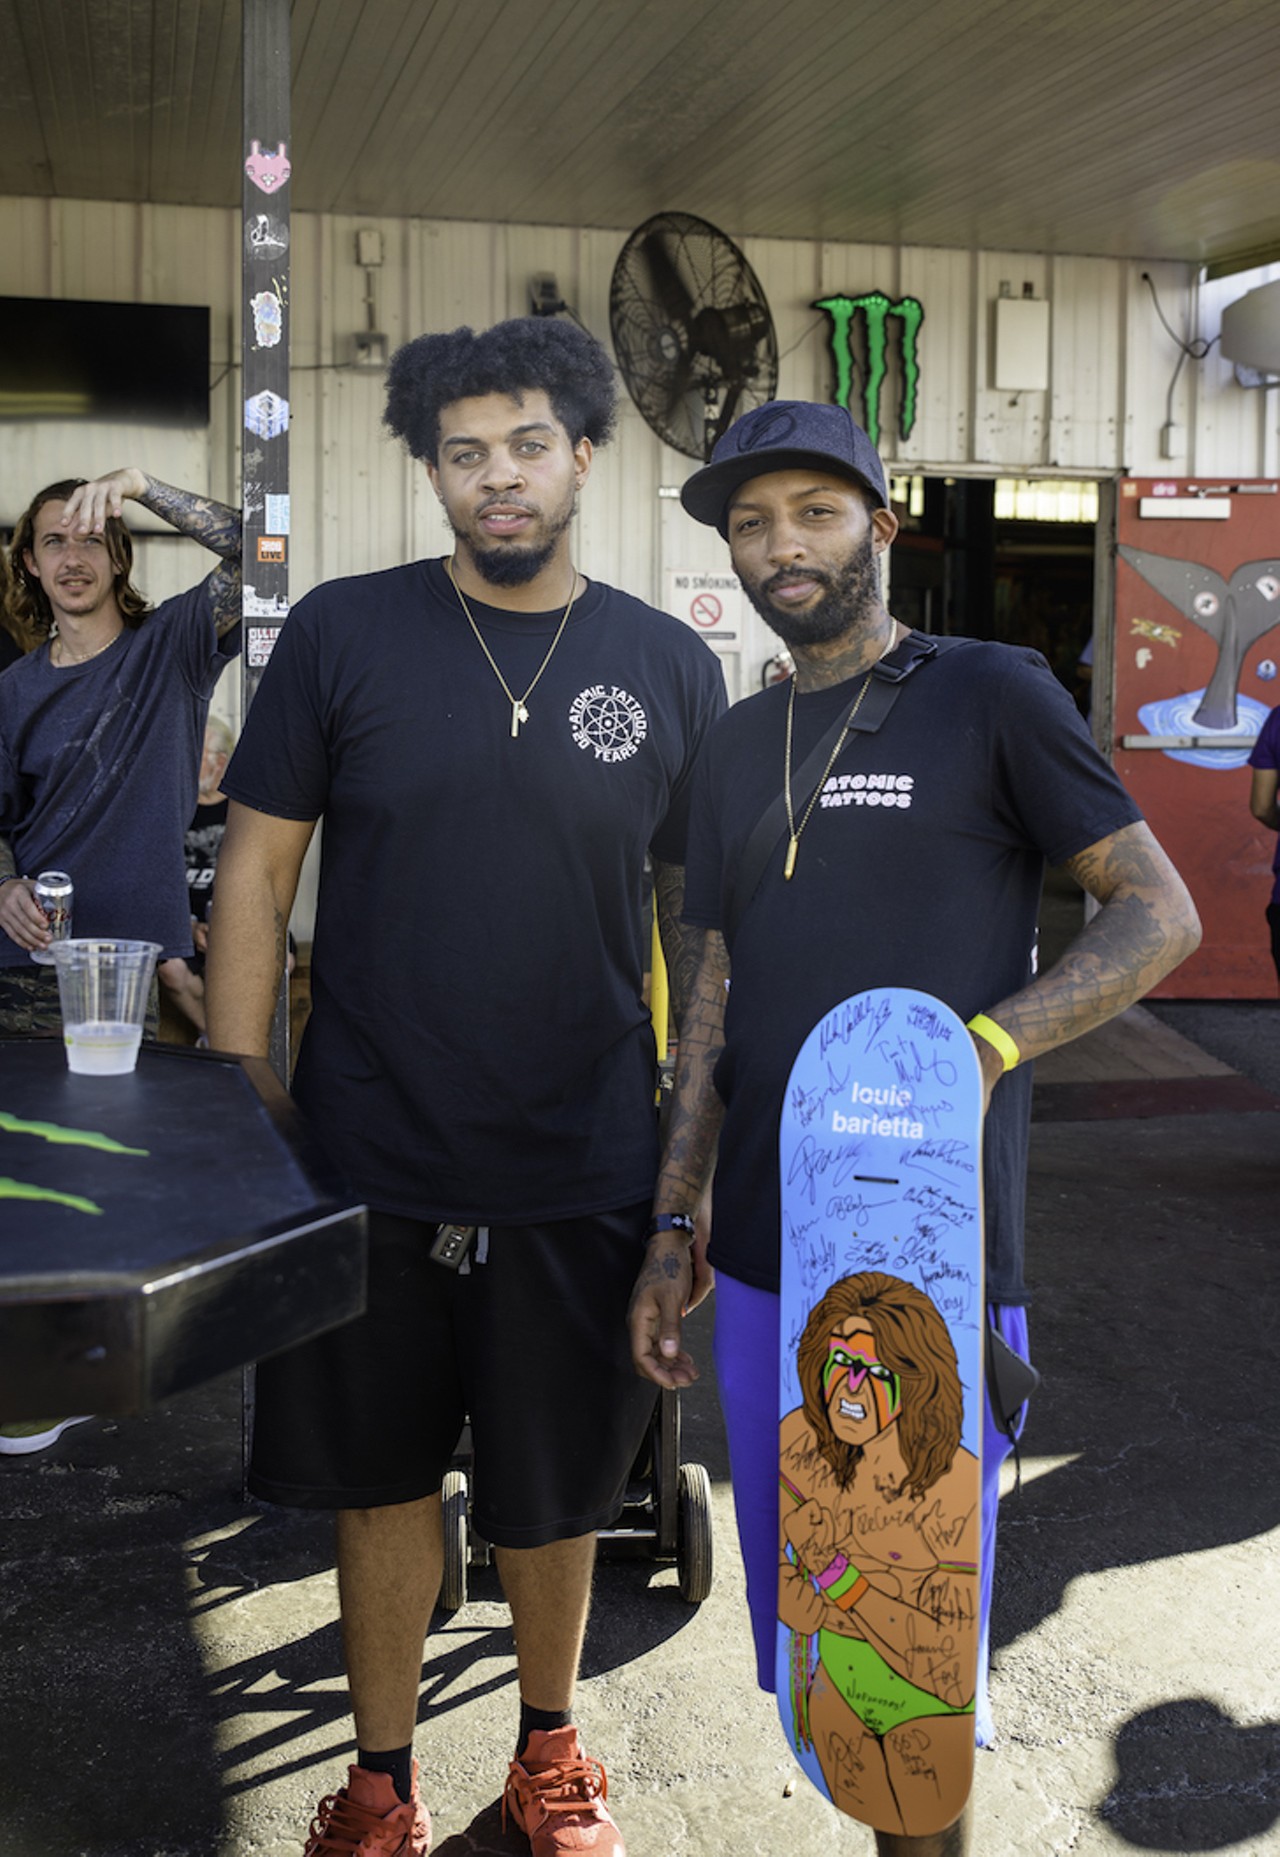 Photos: All the skaters and fans we saw at last weekend's Tampa Pro 2021